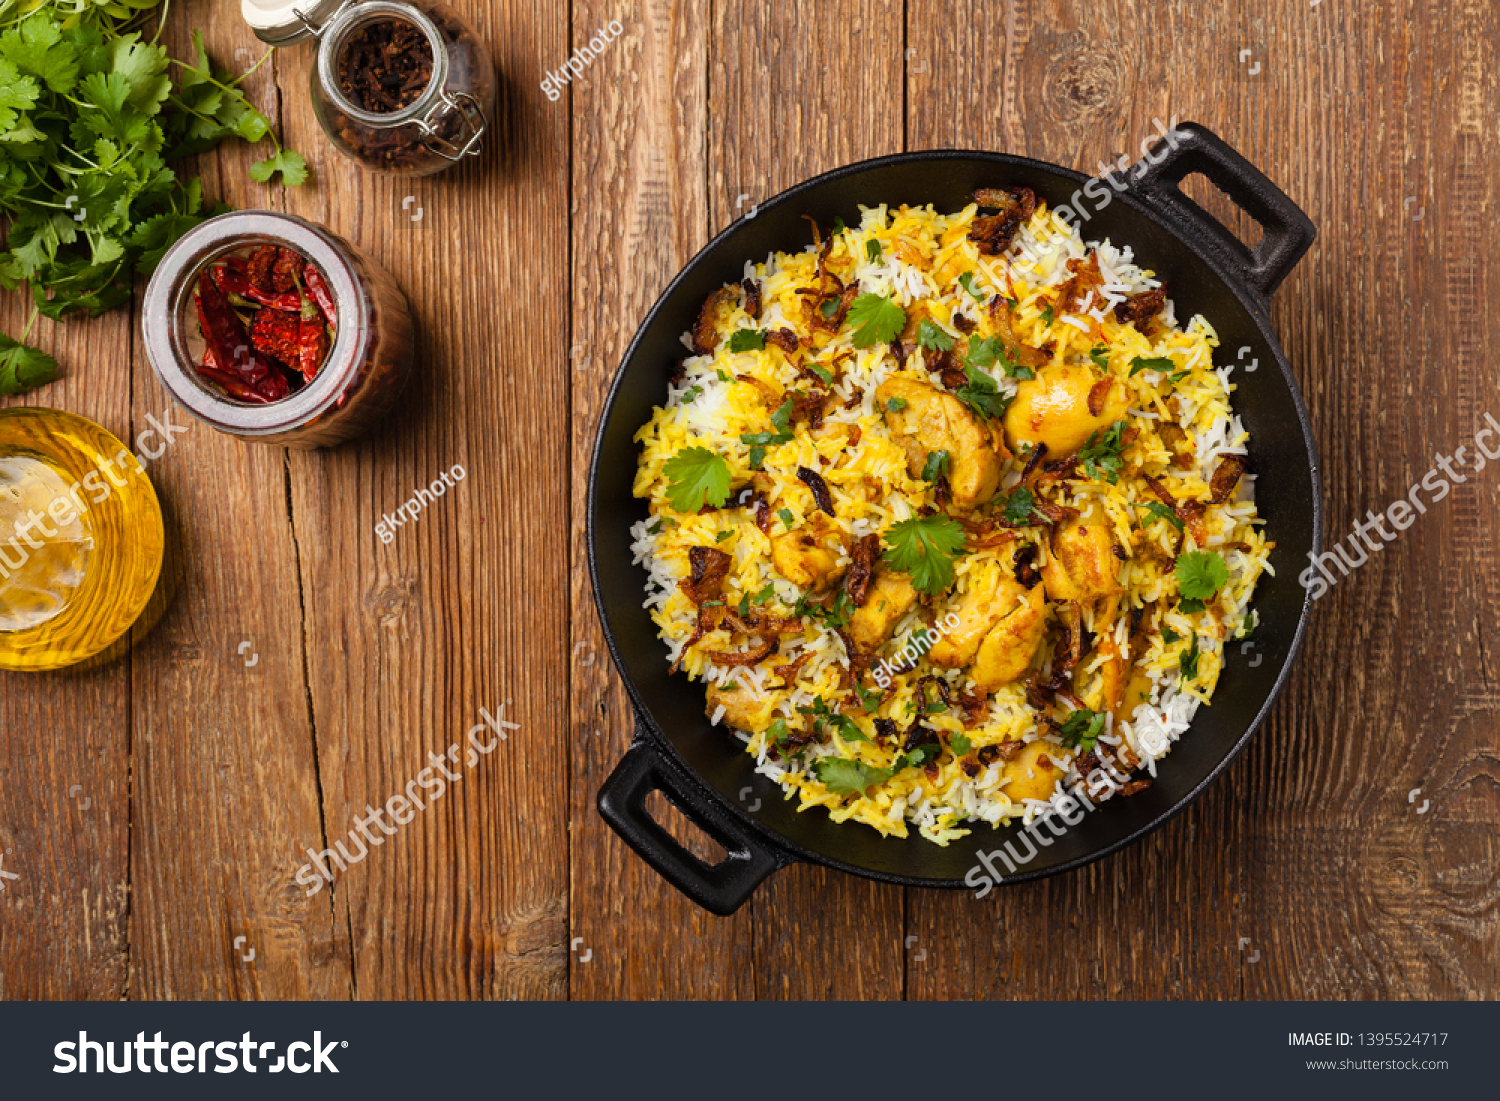 Biryani with chicken. Traditional Indian dish of rice and chicken marinated in spices and yoghurt.Top view. natural wooden background.  #1395524717